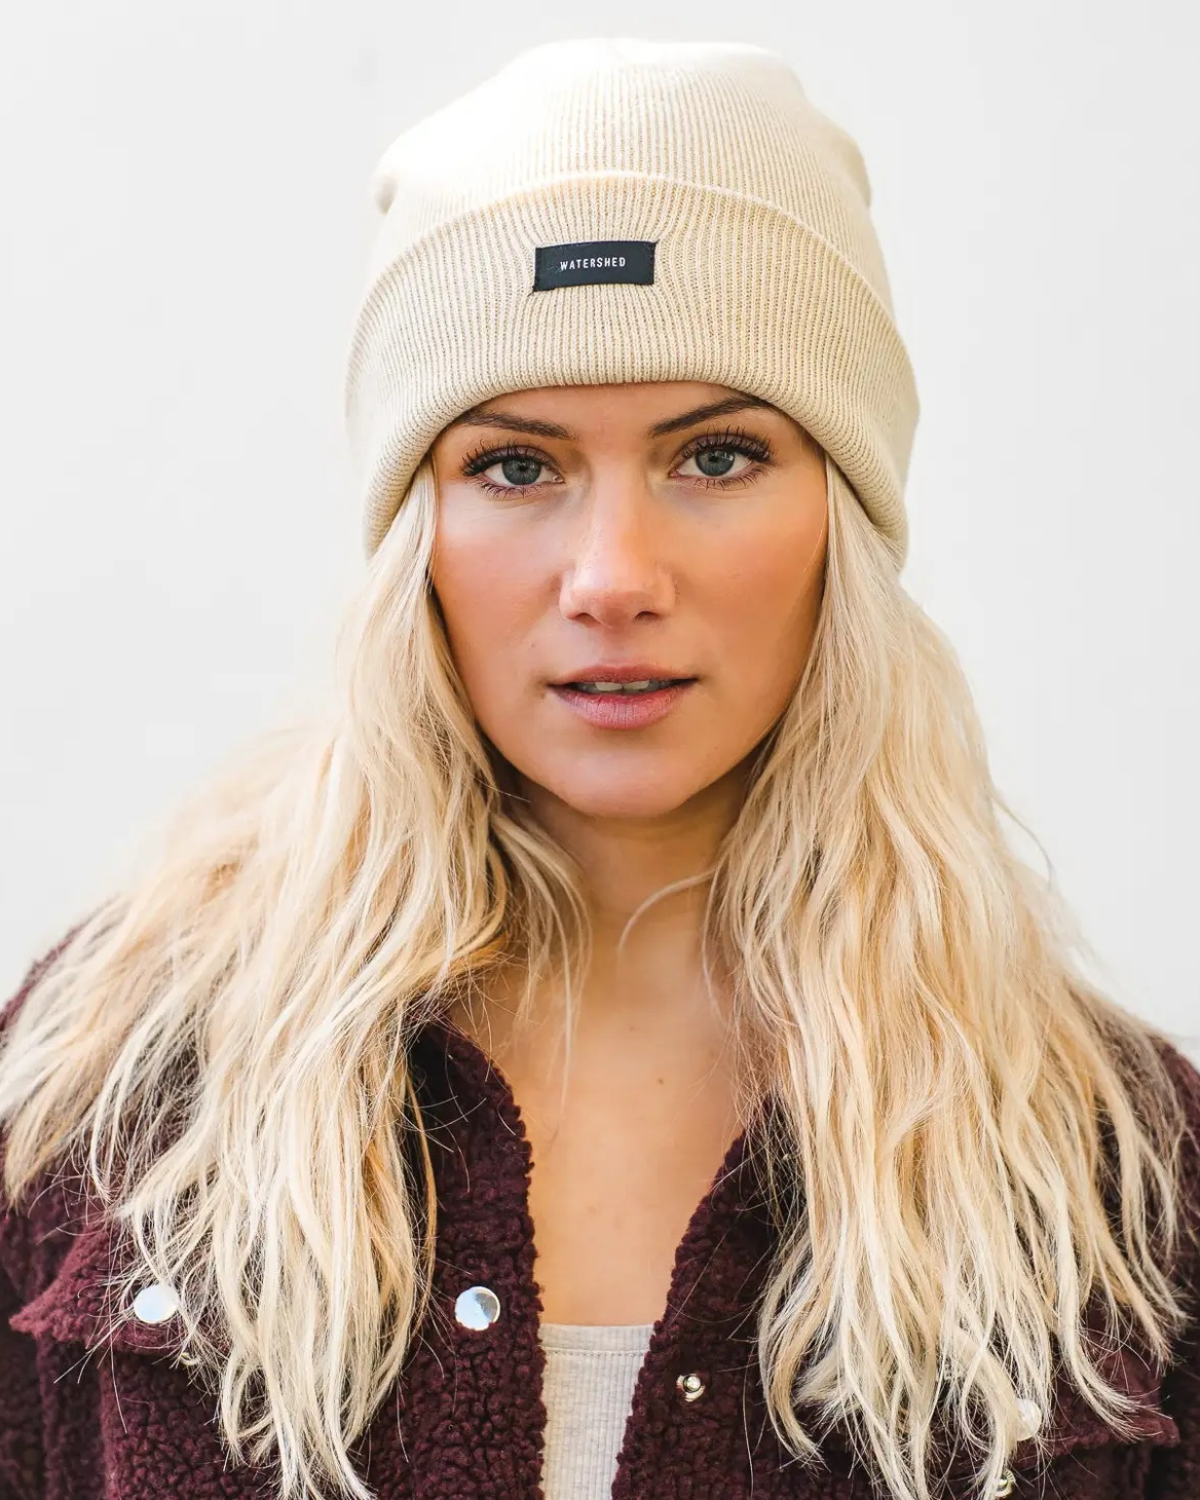 Watershed Issue Beanie - Cream